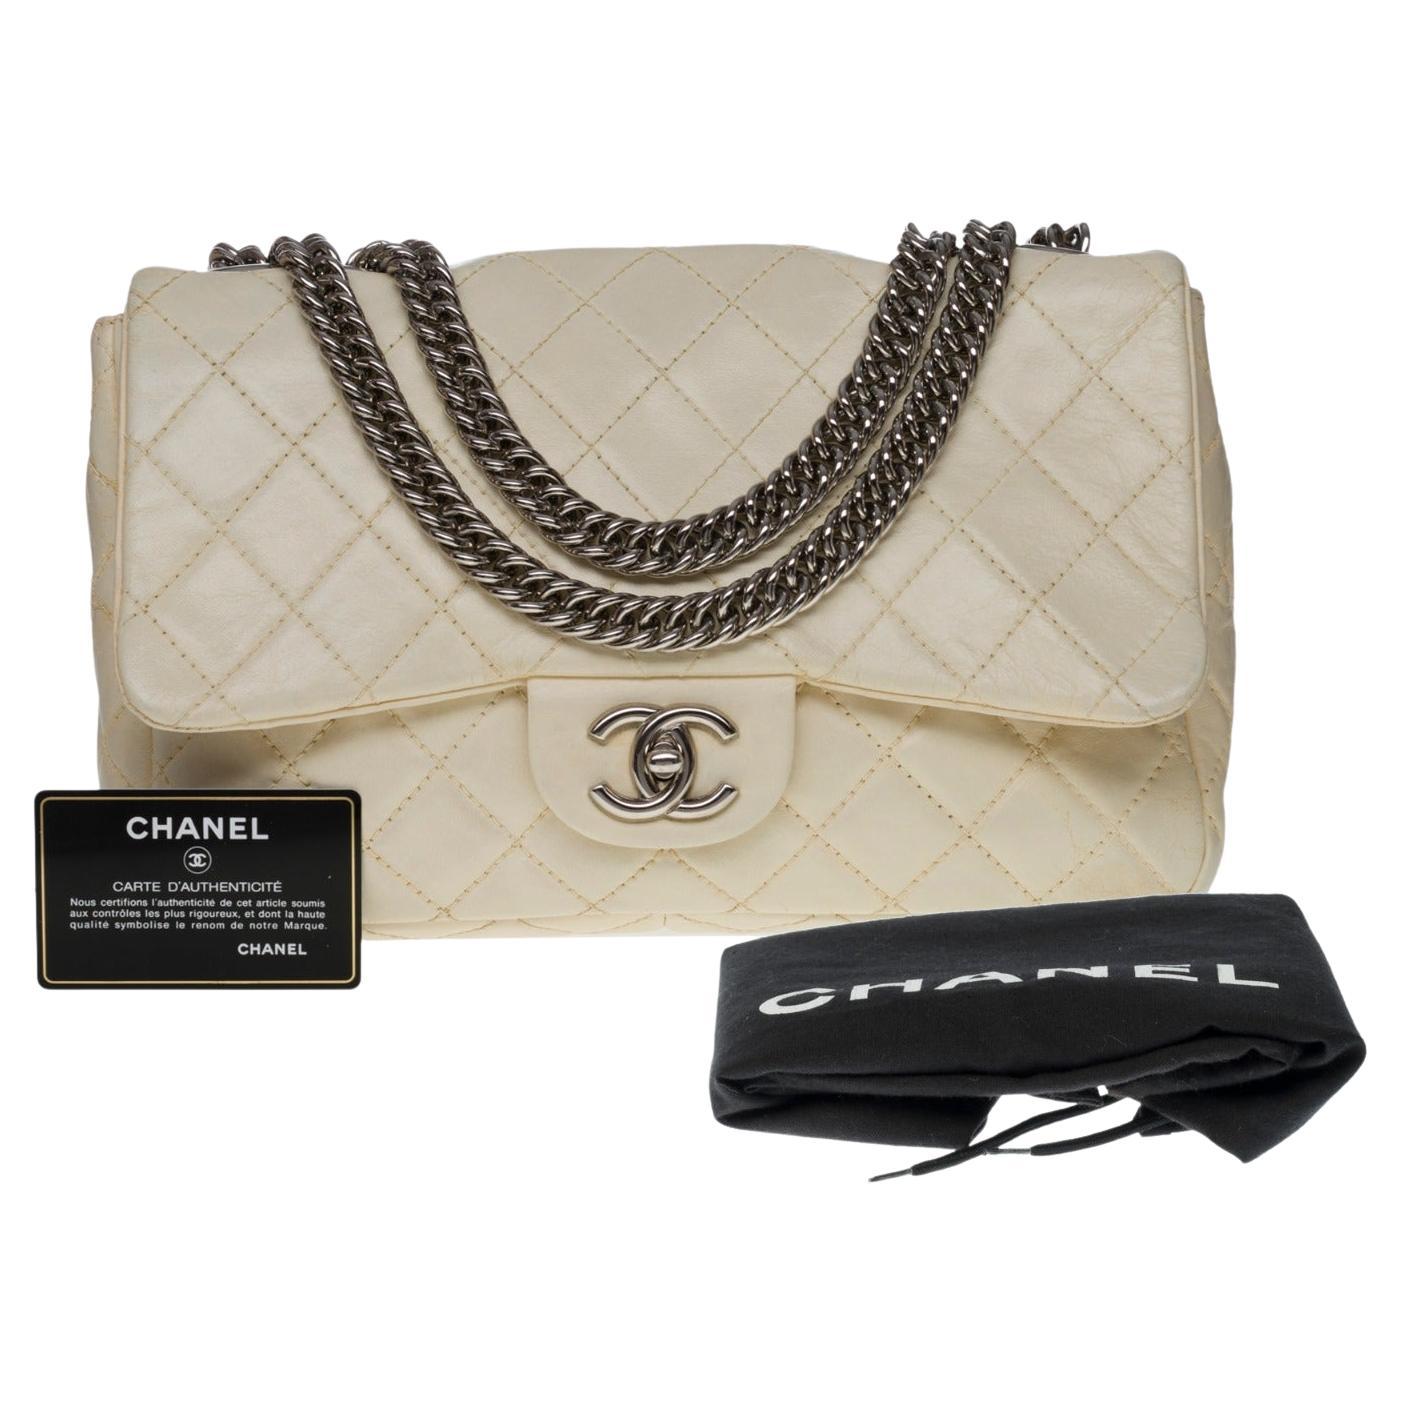 Chanel Timeless/Classique Jumbo Flap bag handbag in ecru quilted lambskin, SHW For Sale